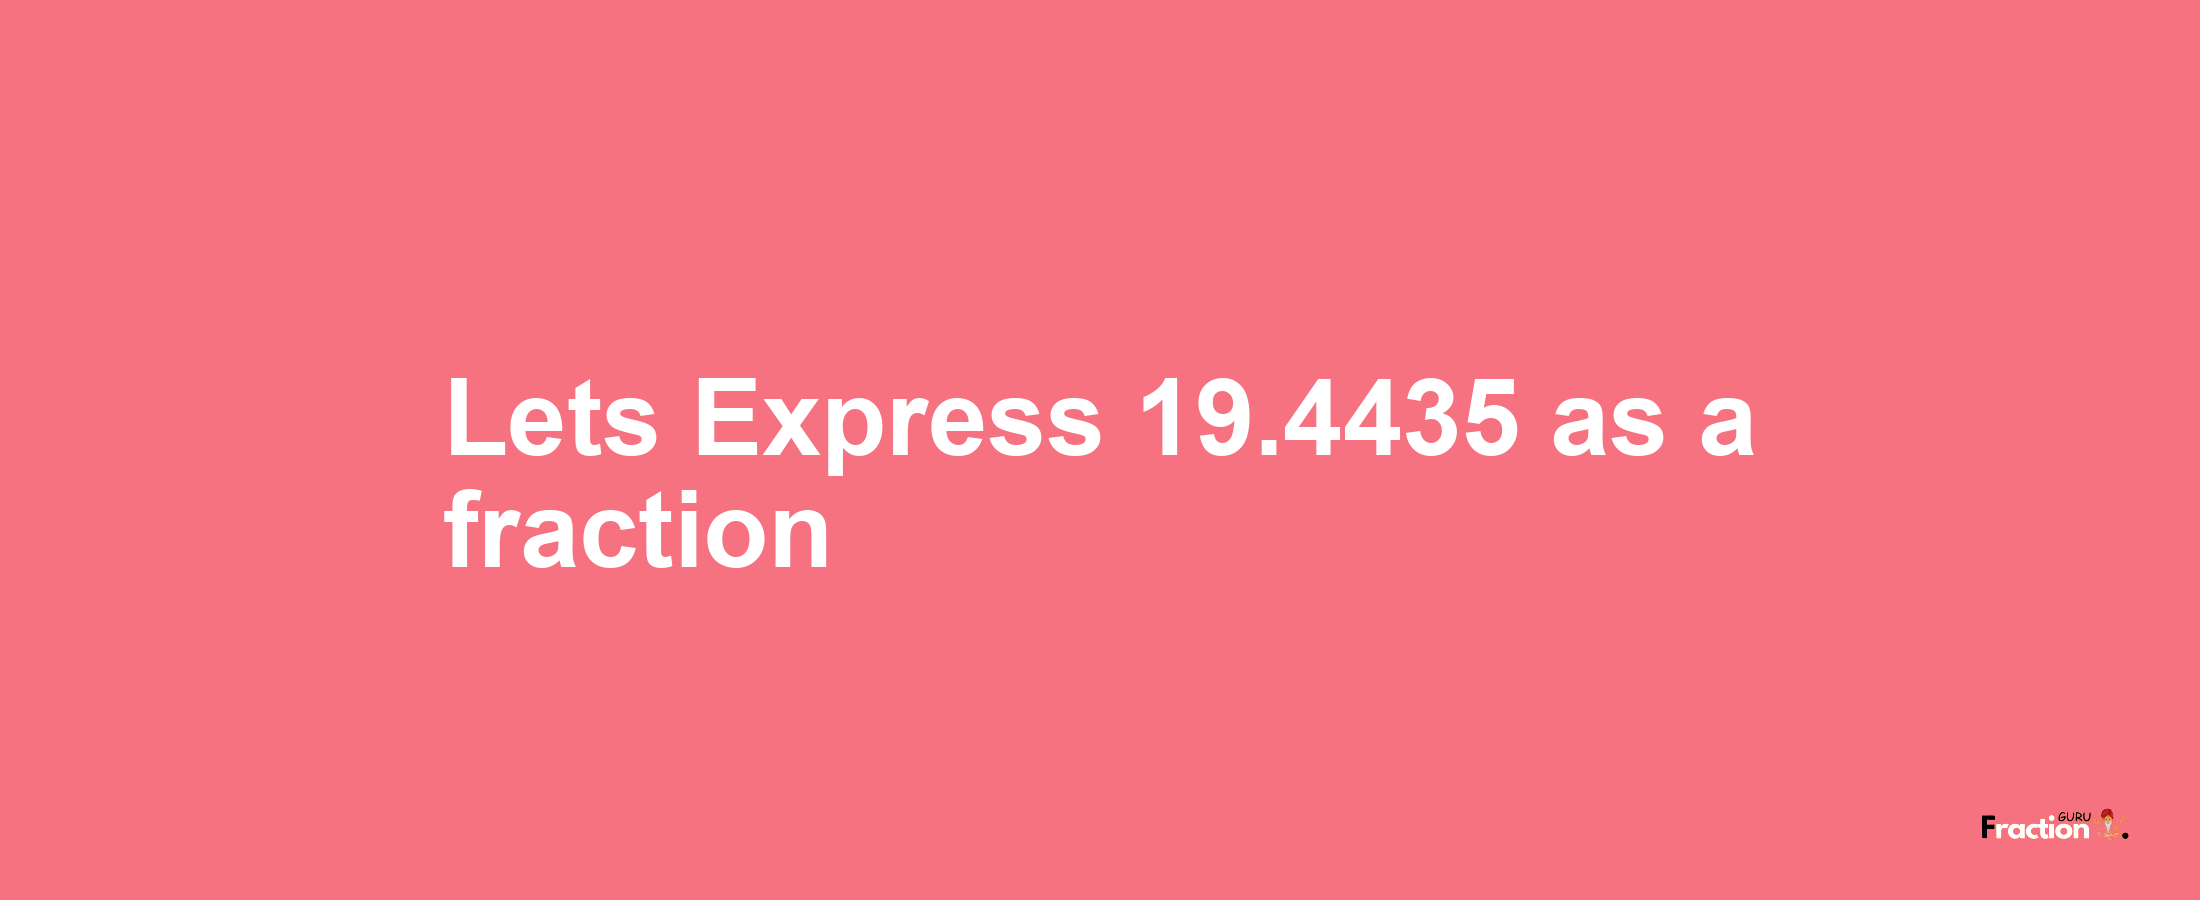 Lets Express 19.4435 as afraction